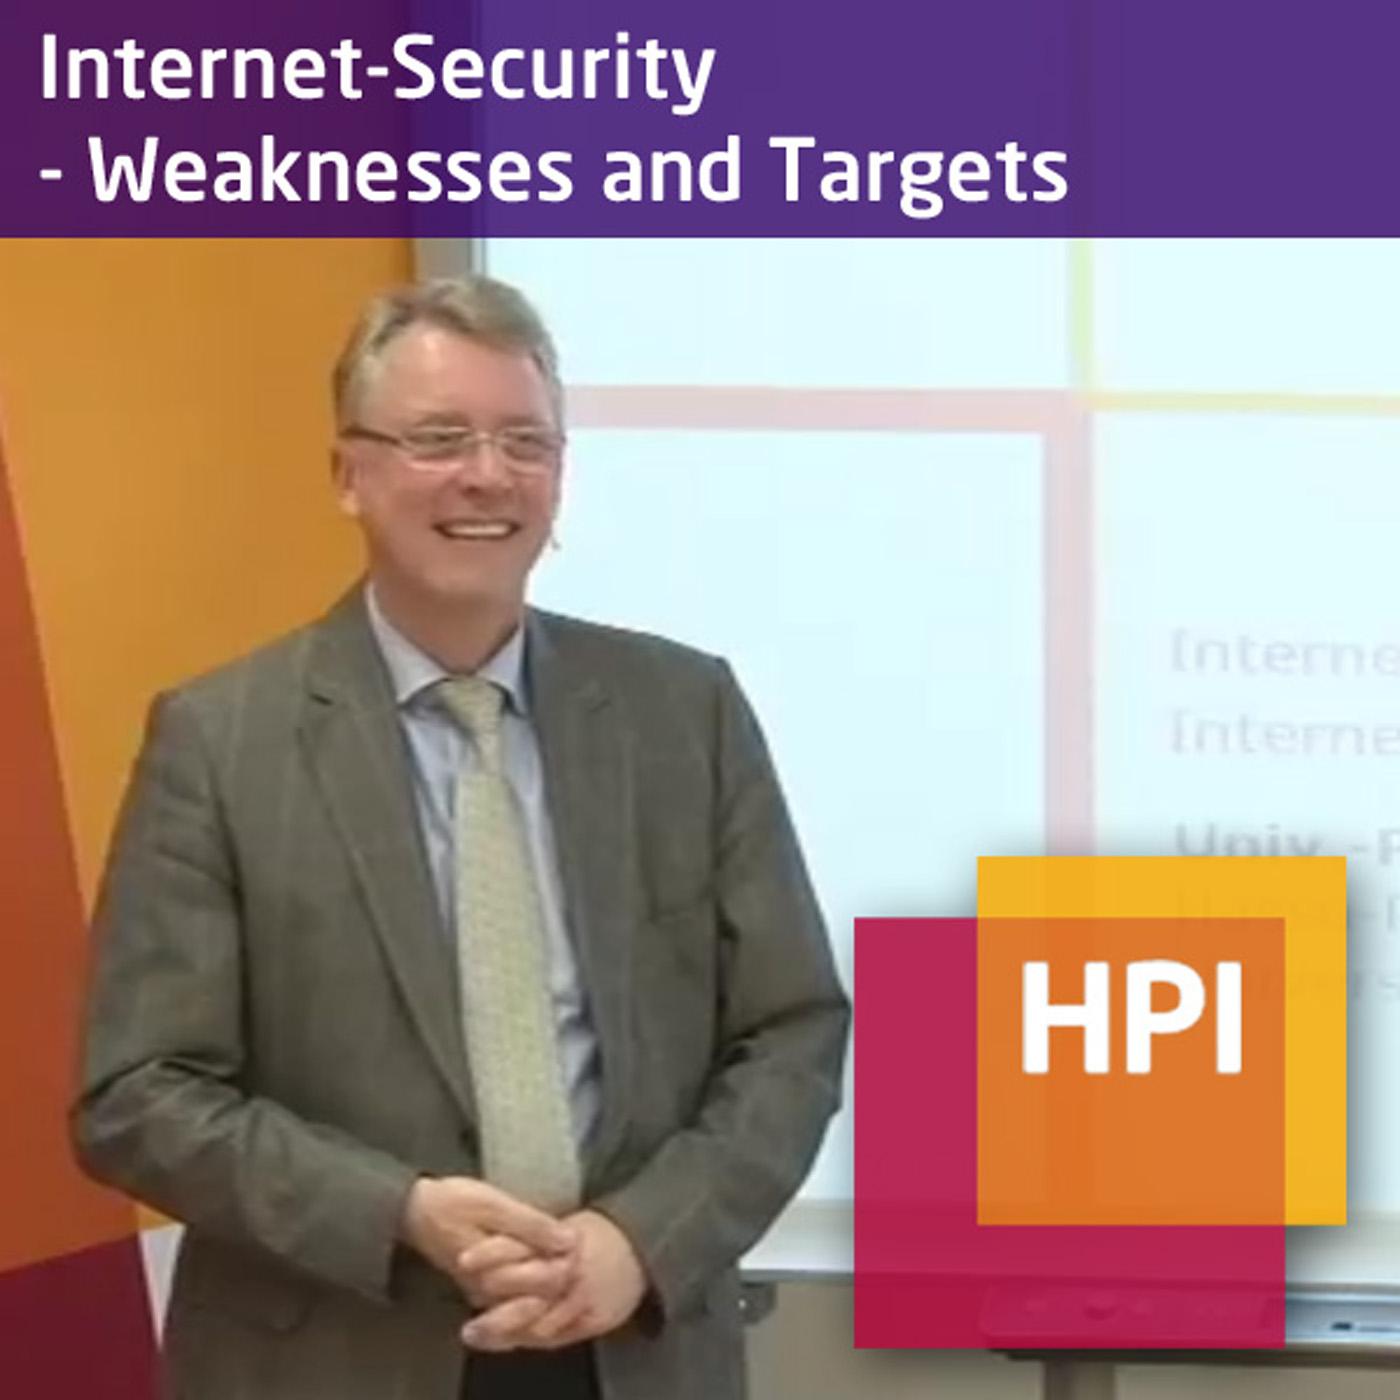 Internet-Security - Weaknesses and Targets (WT 2014/15) - tele-TASK